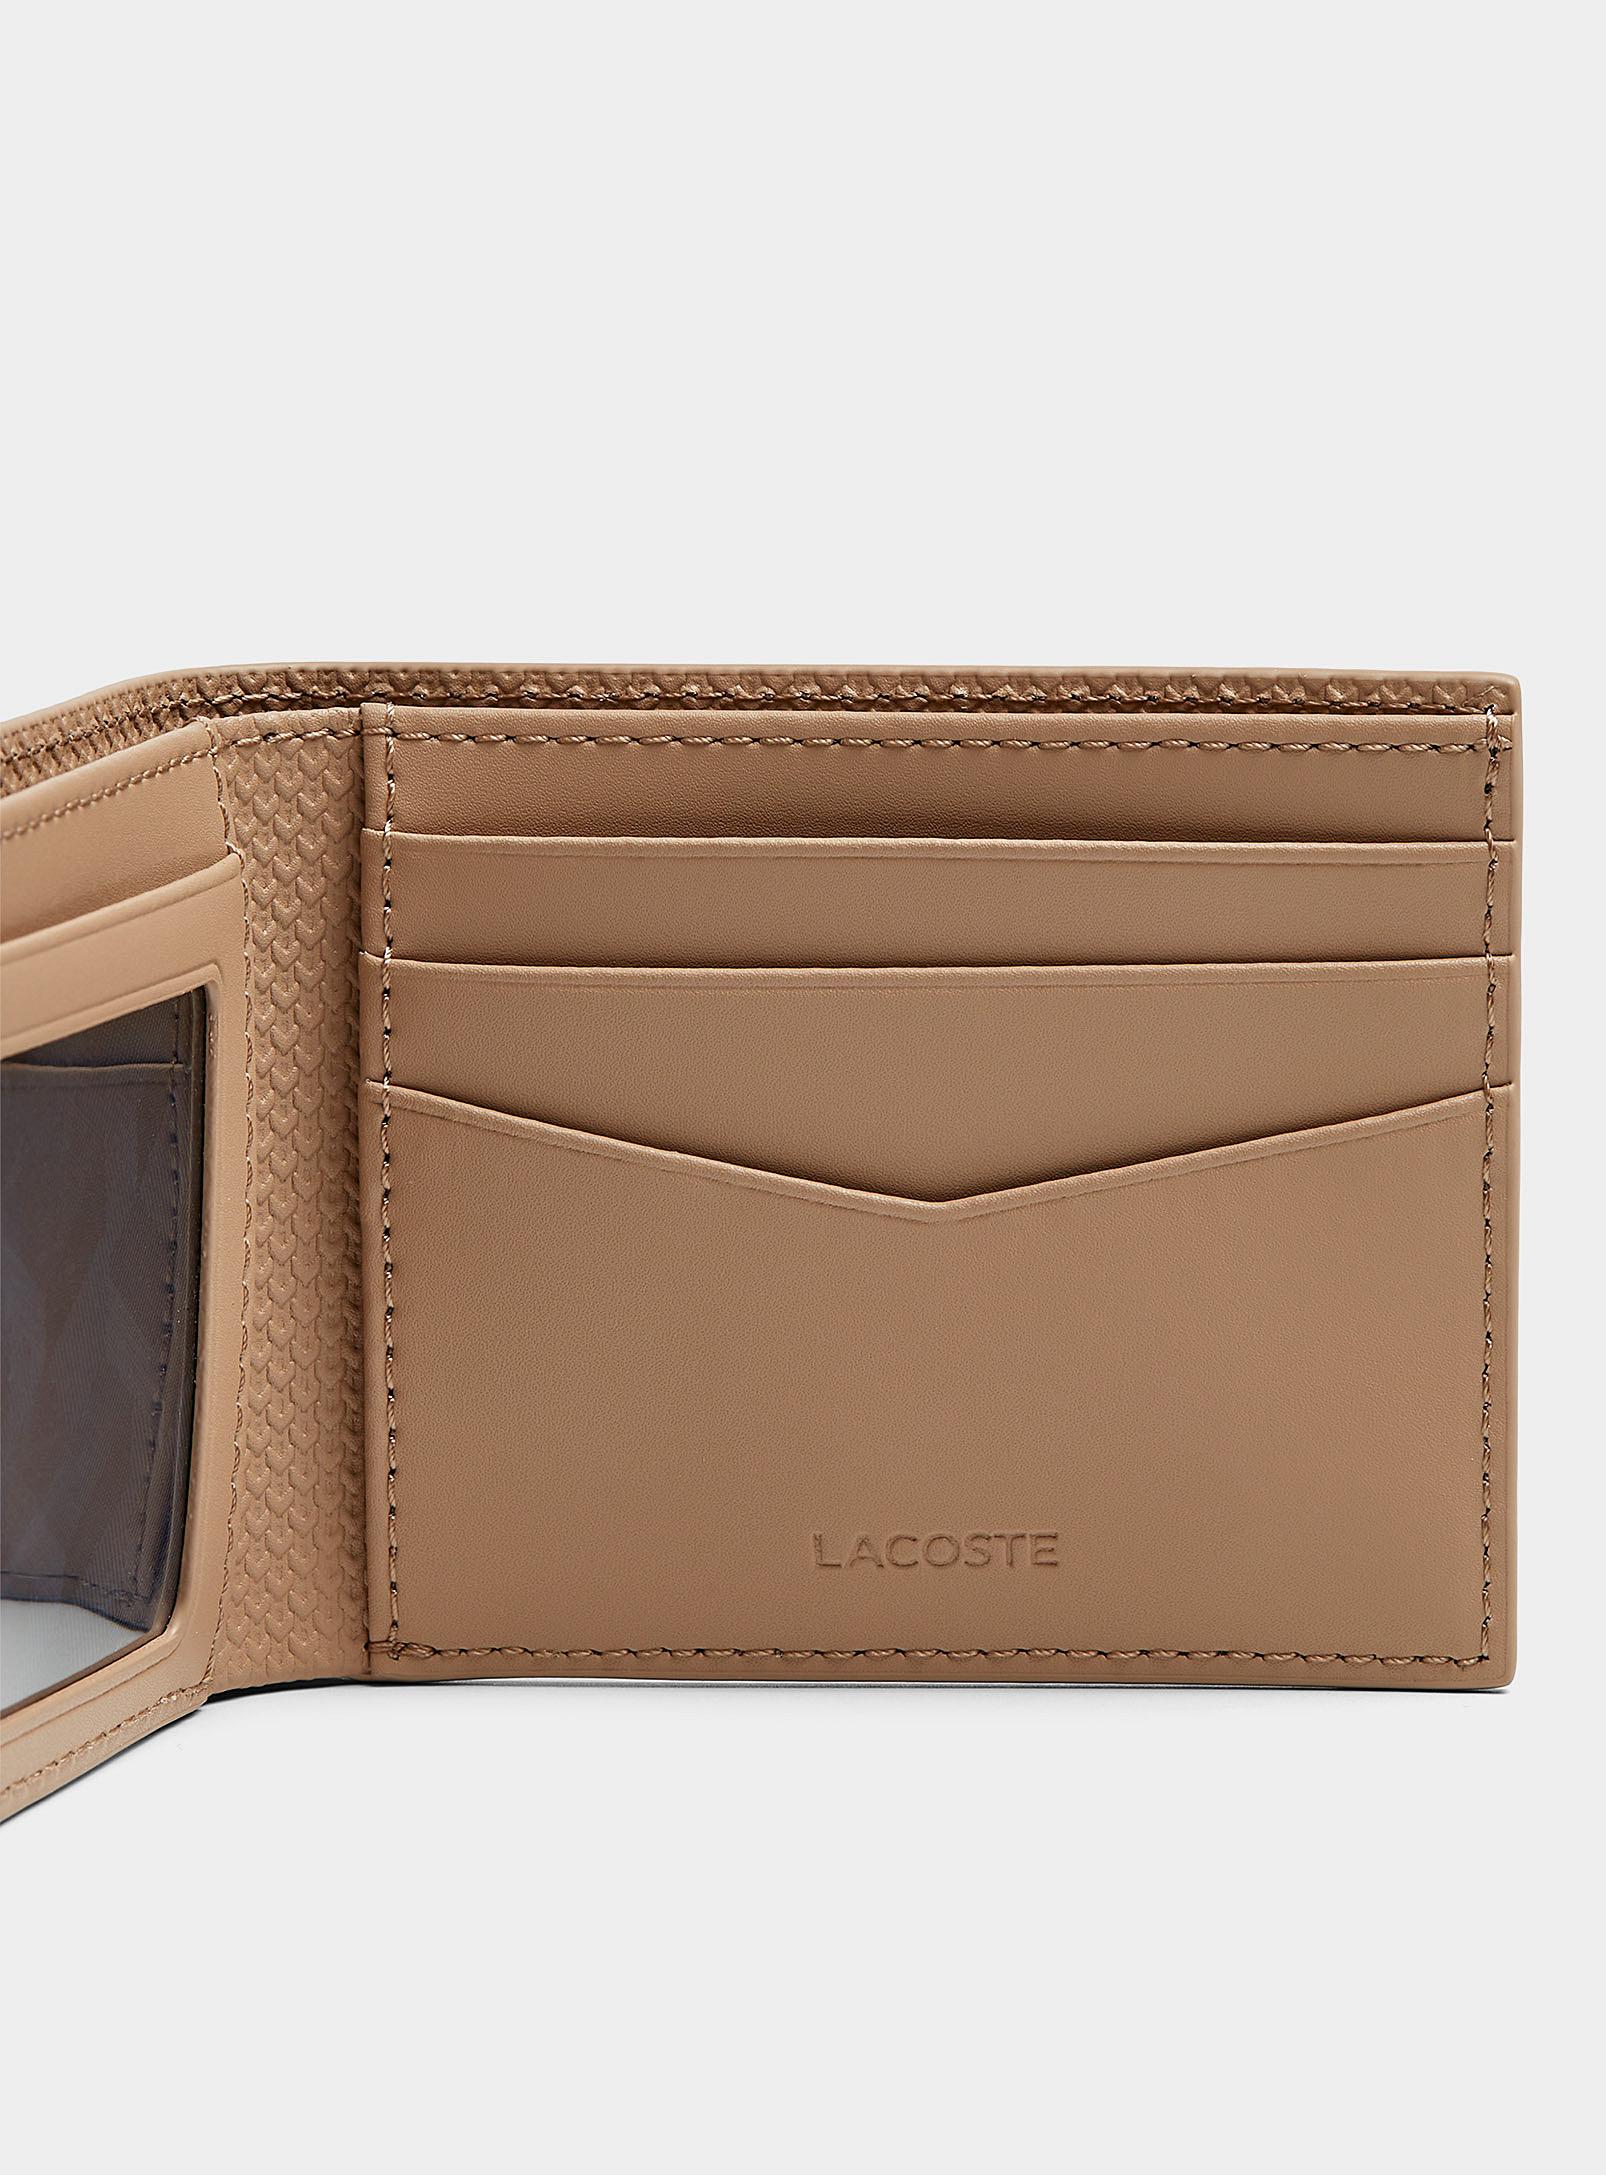 Lacoste Textured Cream Leather Wallet in Natural for Men | Lyst